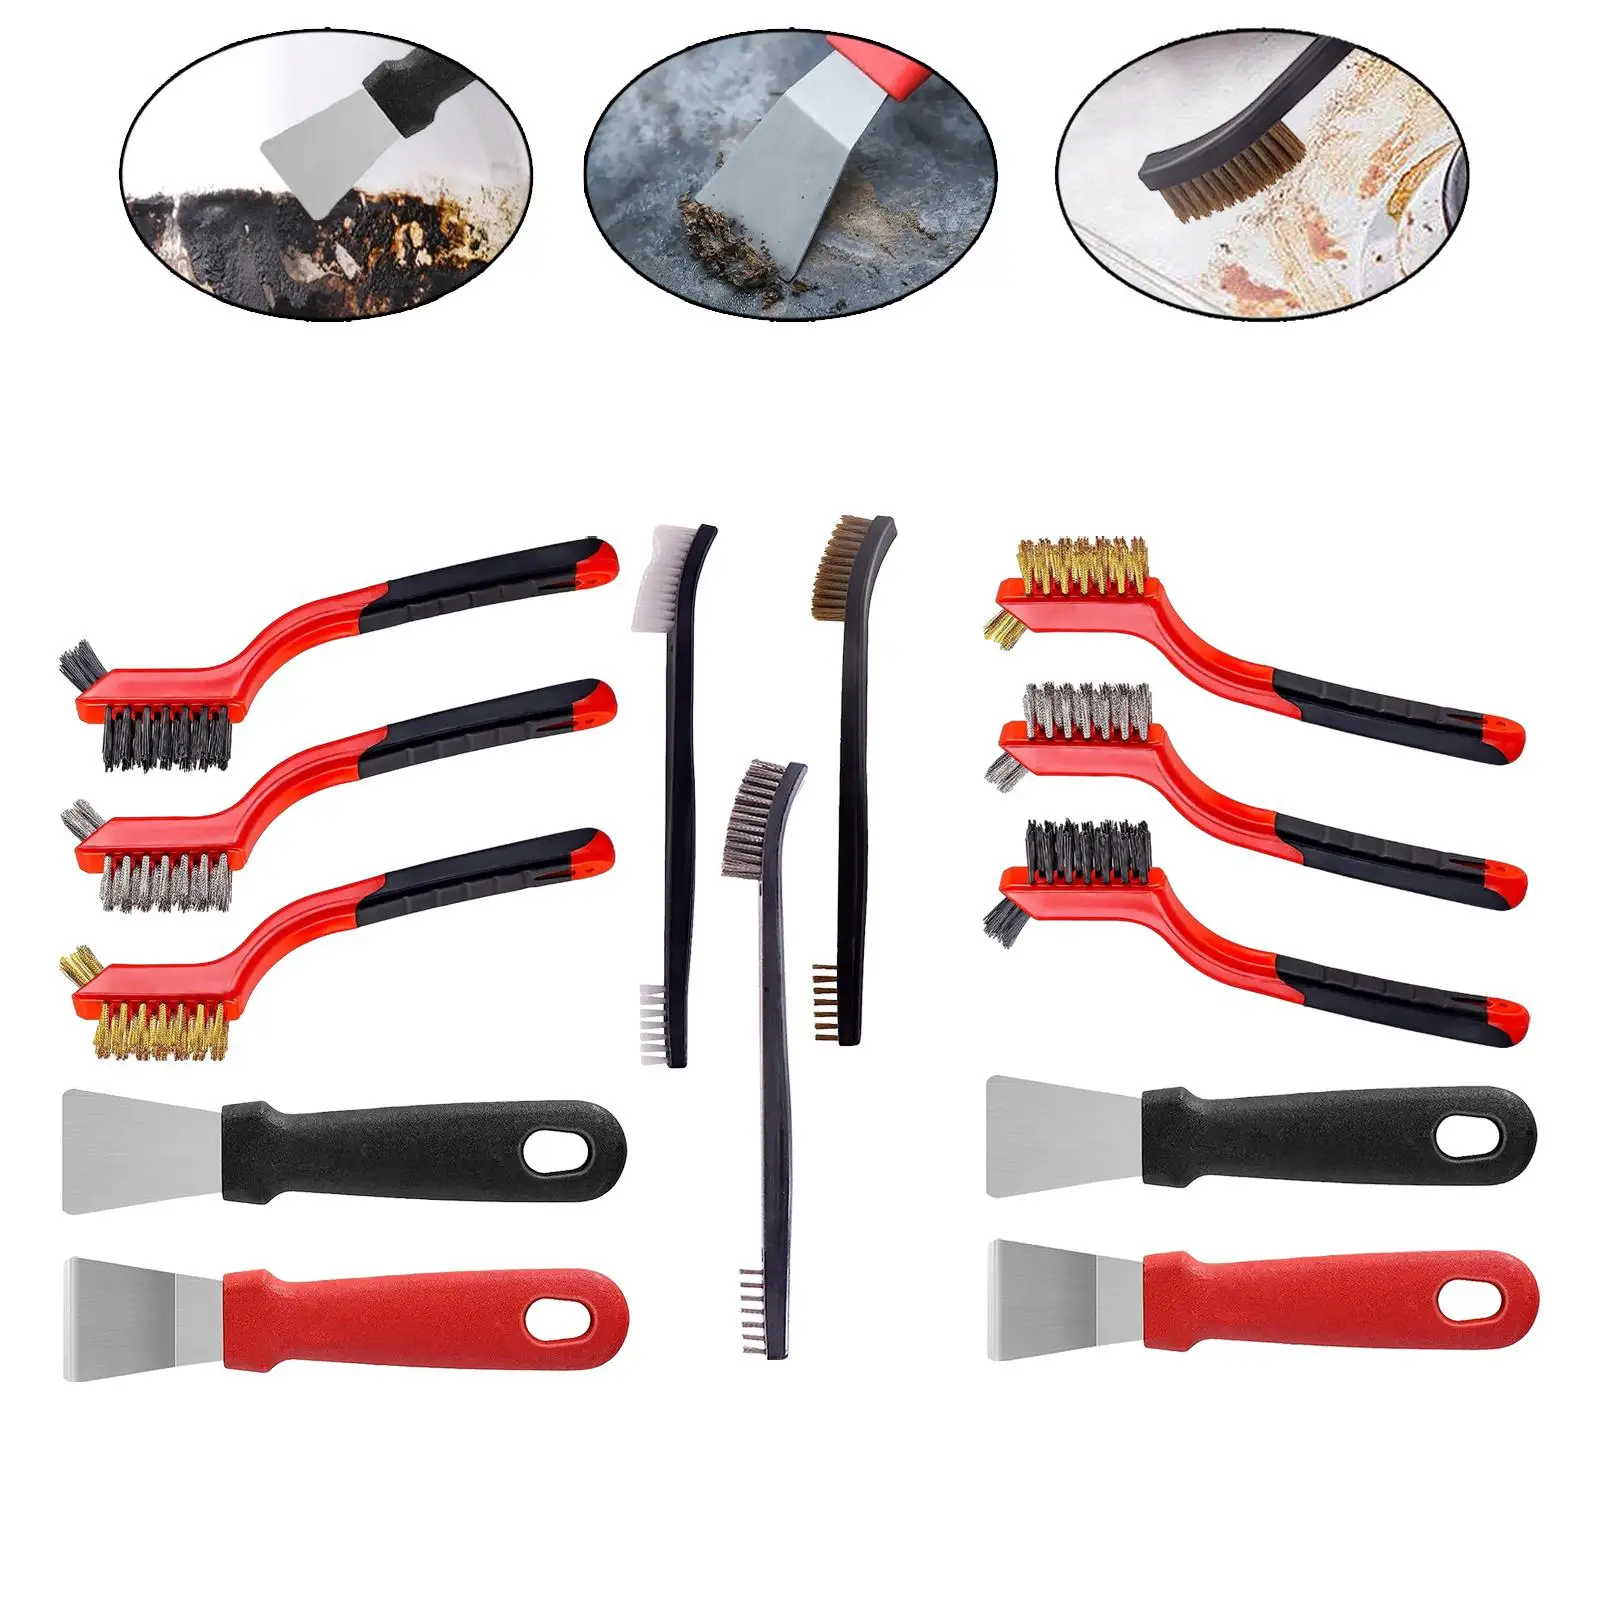 Wire Brush Set Mini Wire Brush Squeegee for Kitchen Rust Removal Home